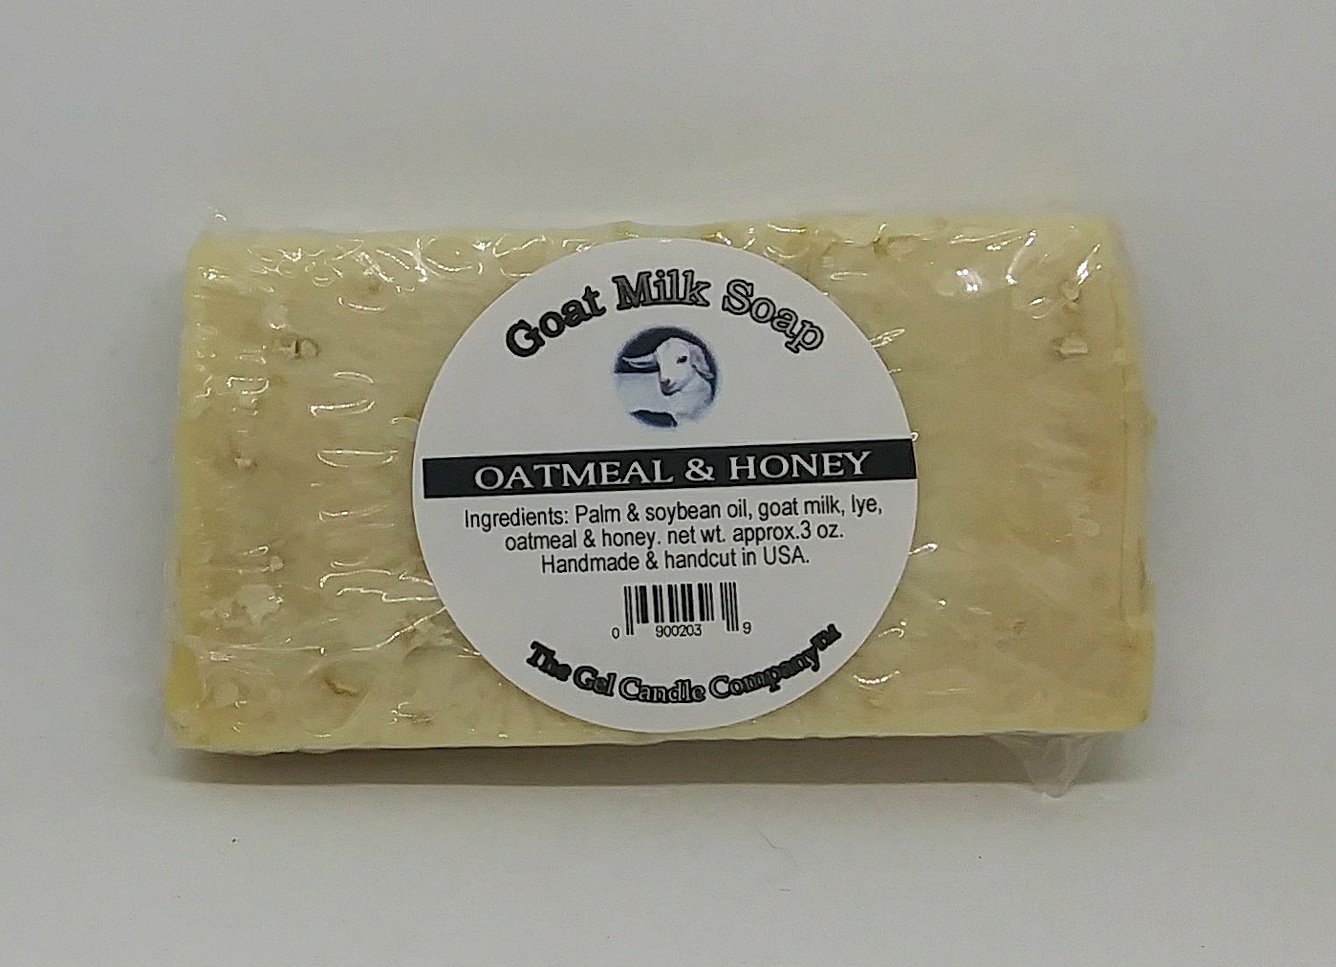 Unscented Oatmeal and Honey - Natural Goat's Milk Soap